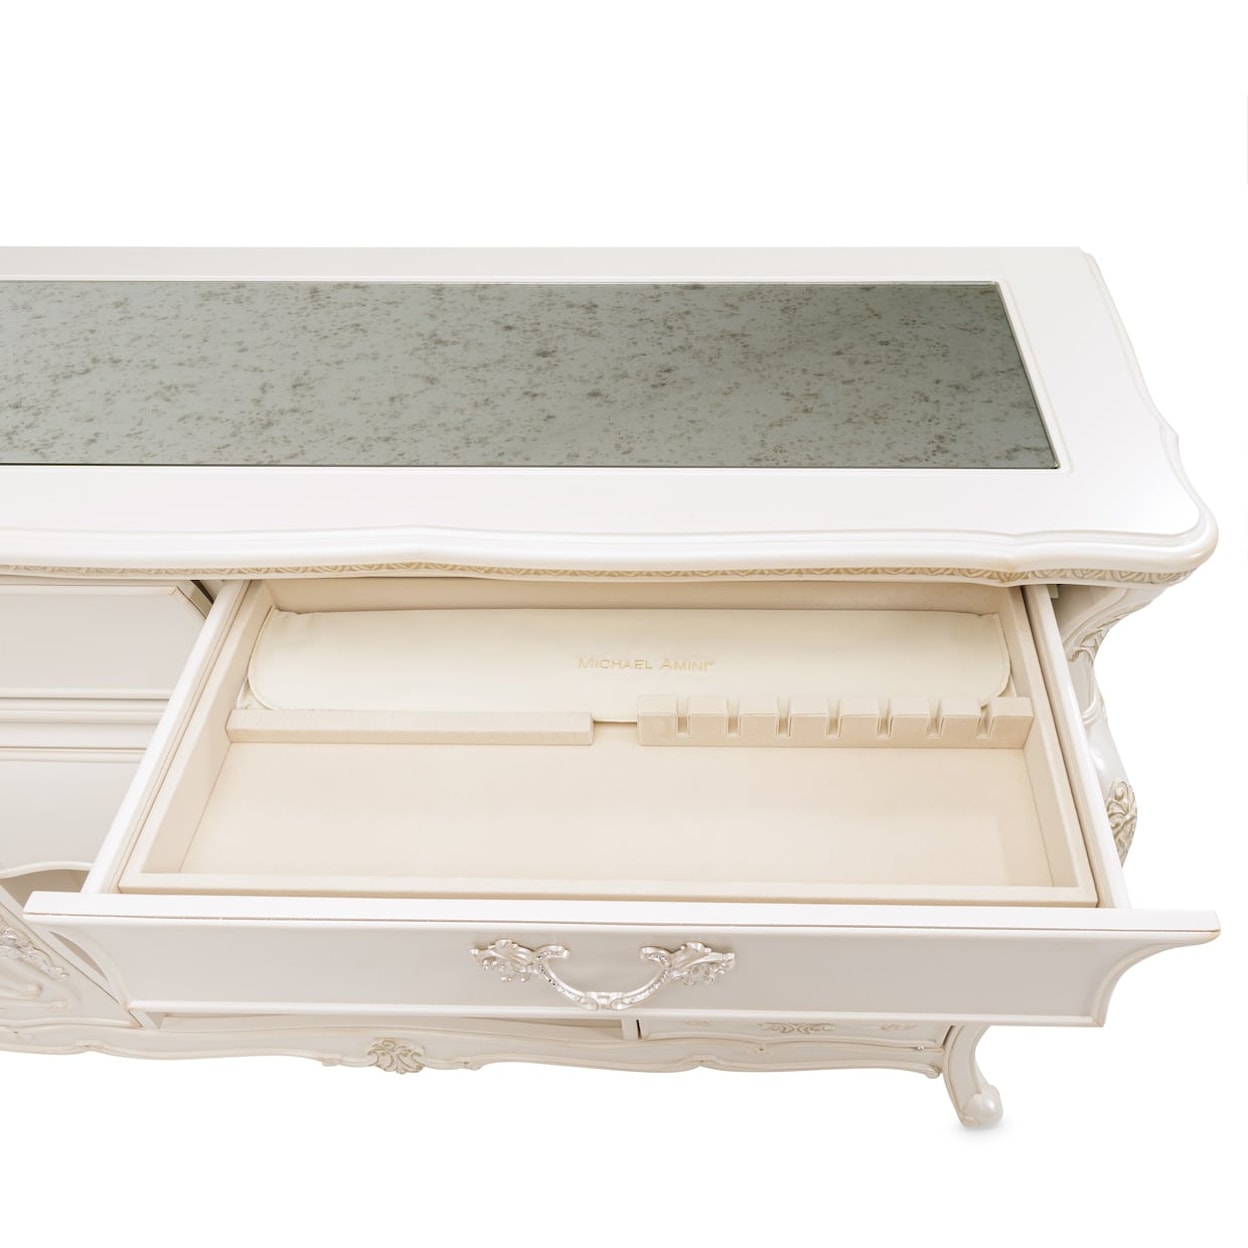 Michael Amini Lavelle Classic Pearl 3-Drawer Sideboard and Mirror